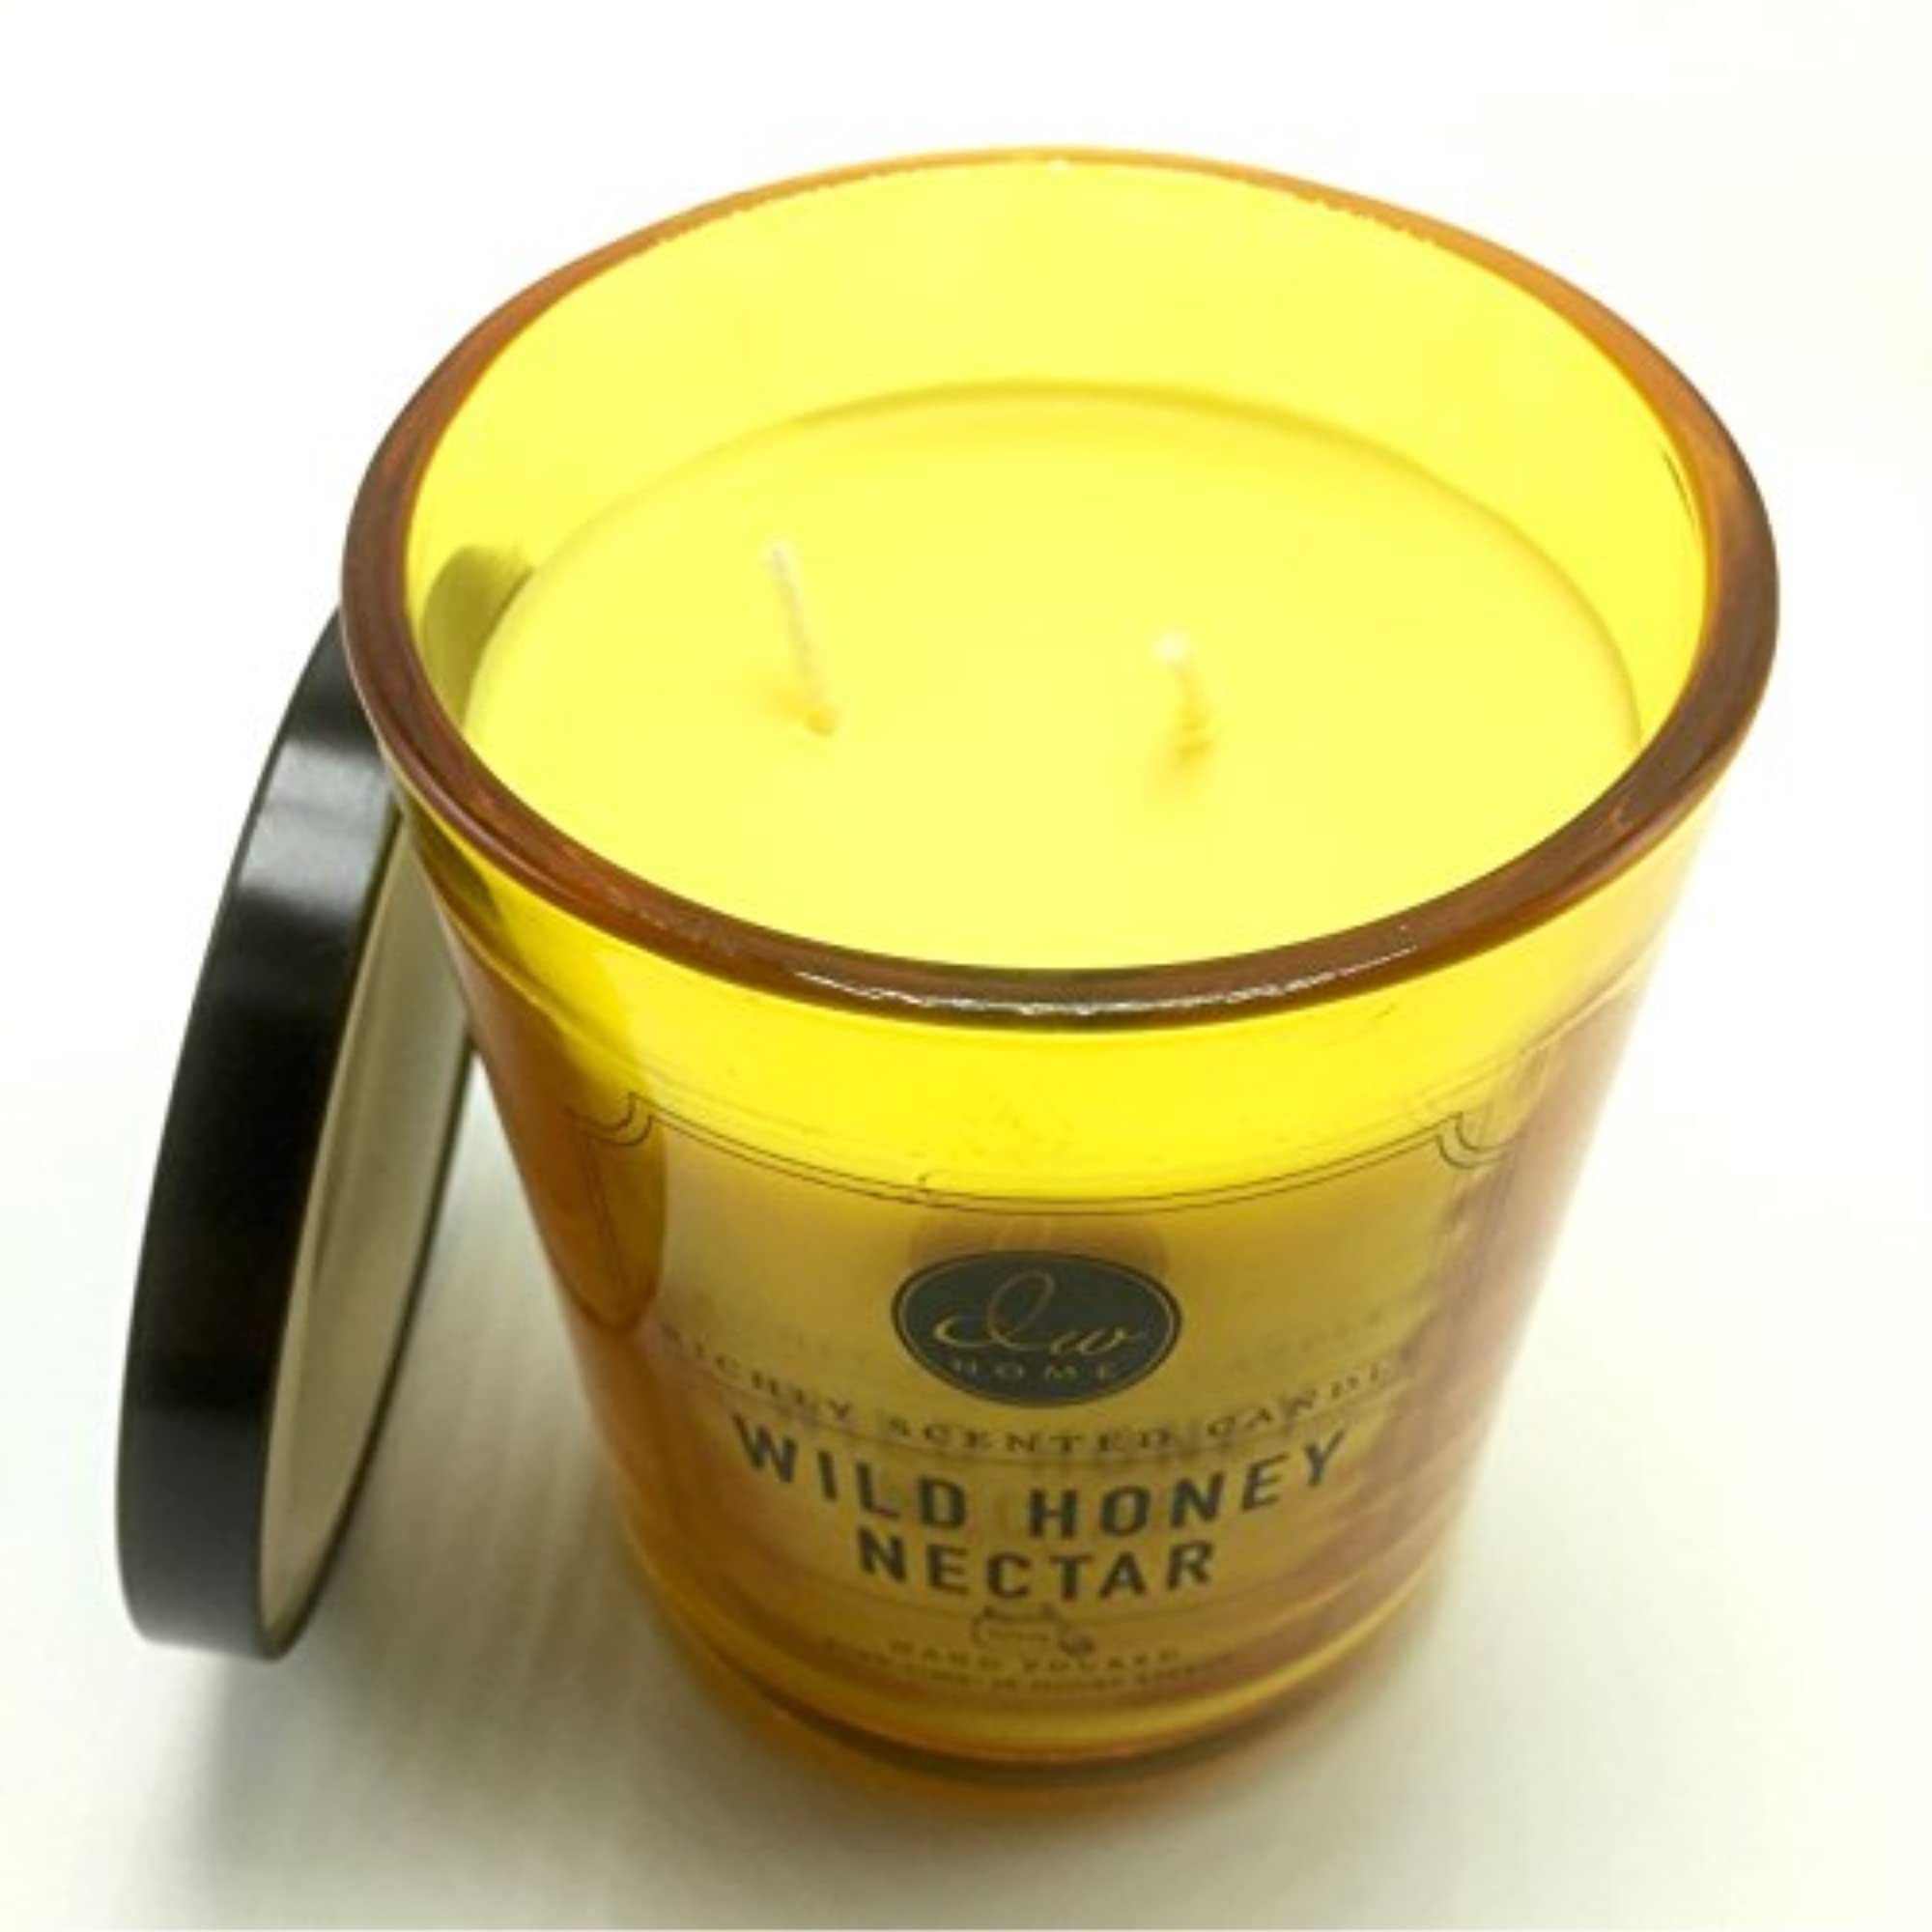 DW Home Wild Honey Nectar 15.48 oz. Candle in Glass jar